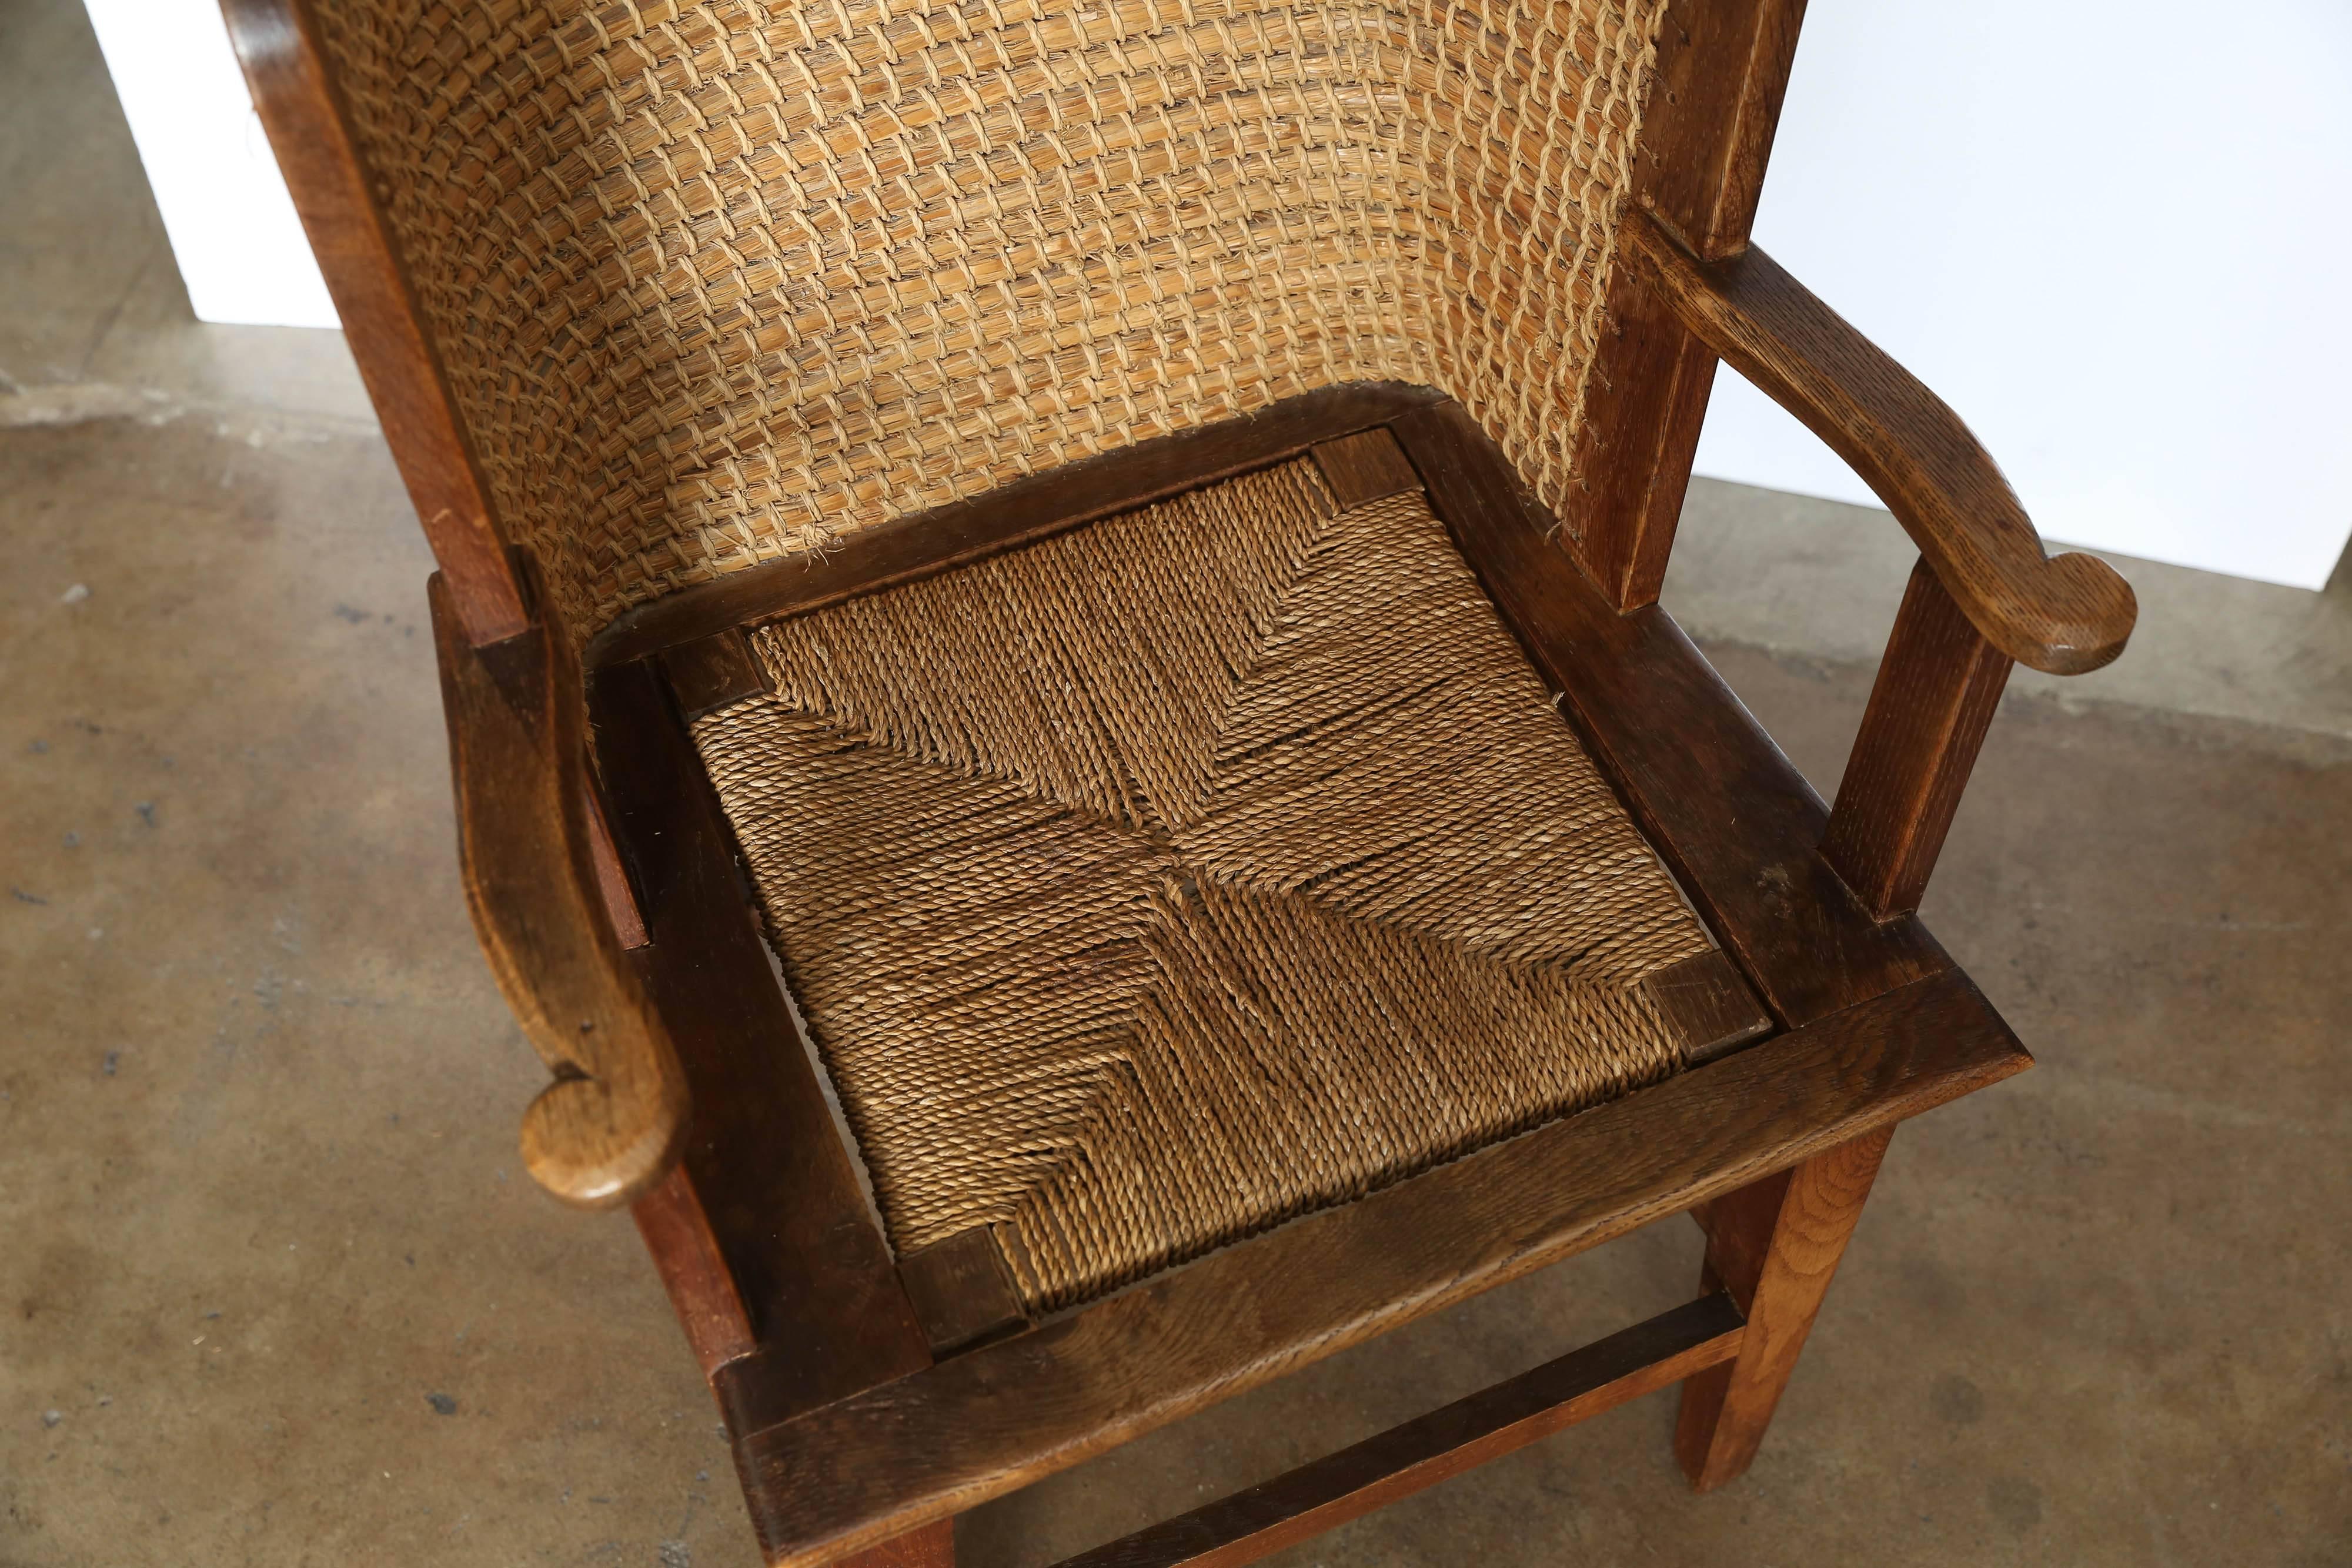 Child's orkney chair with woven reed back and wooden frame. Seat is removable, circa 1900.